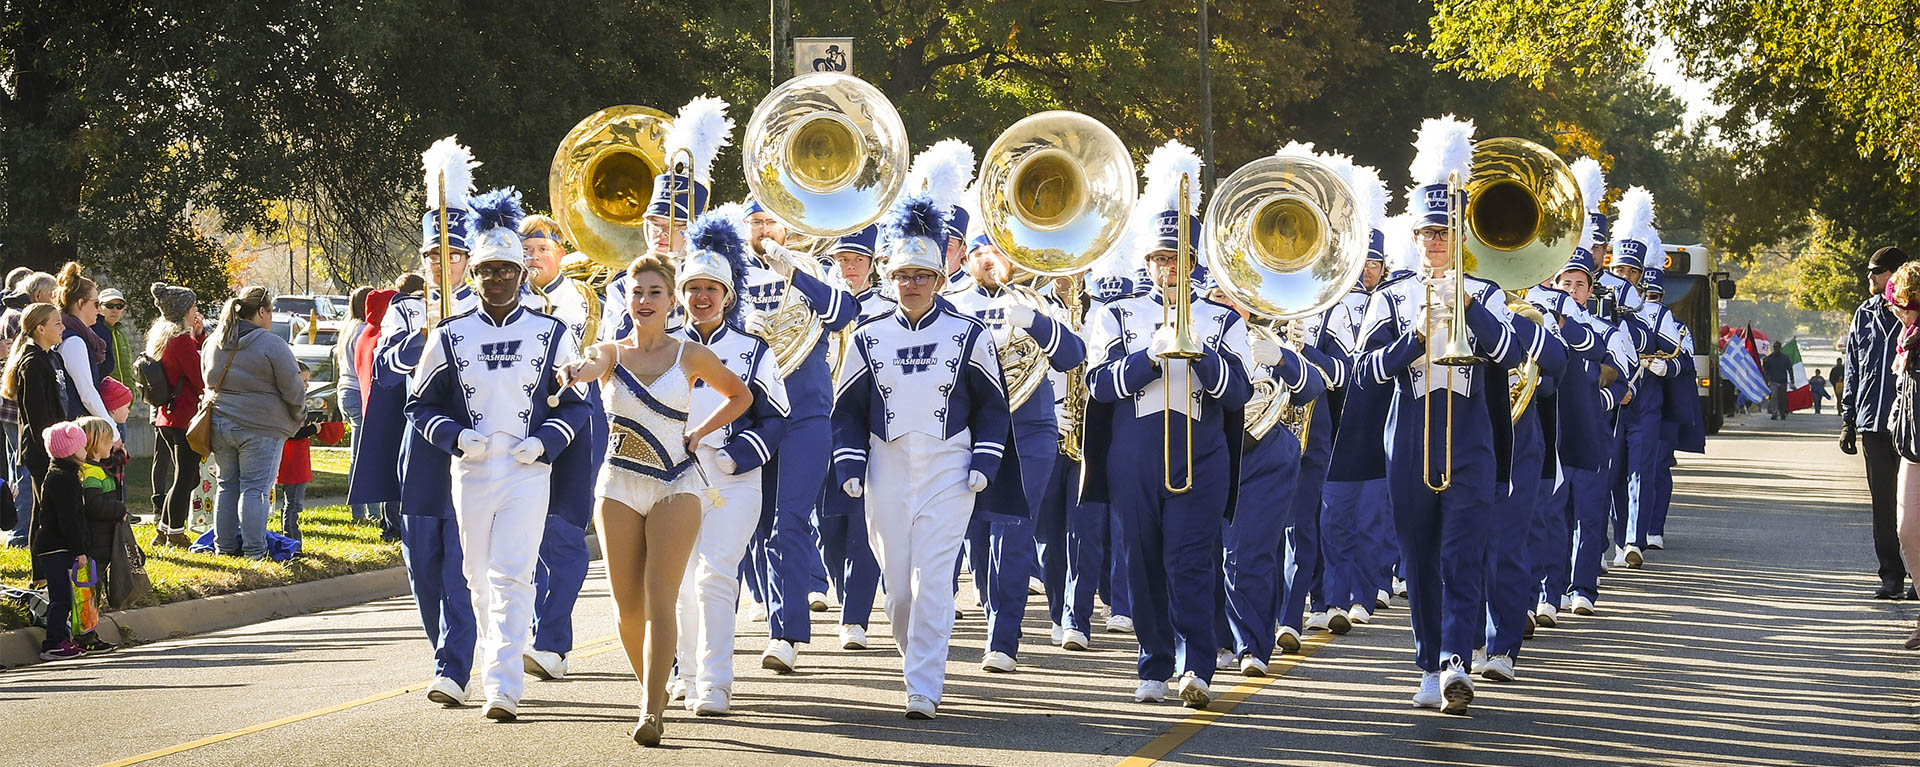 The Marching Band performs during the Homecoming parade.